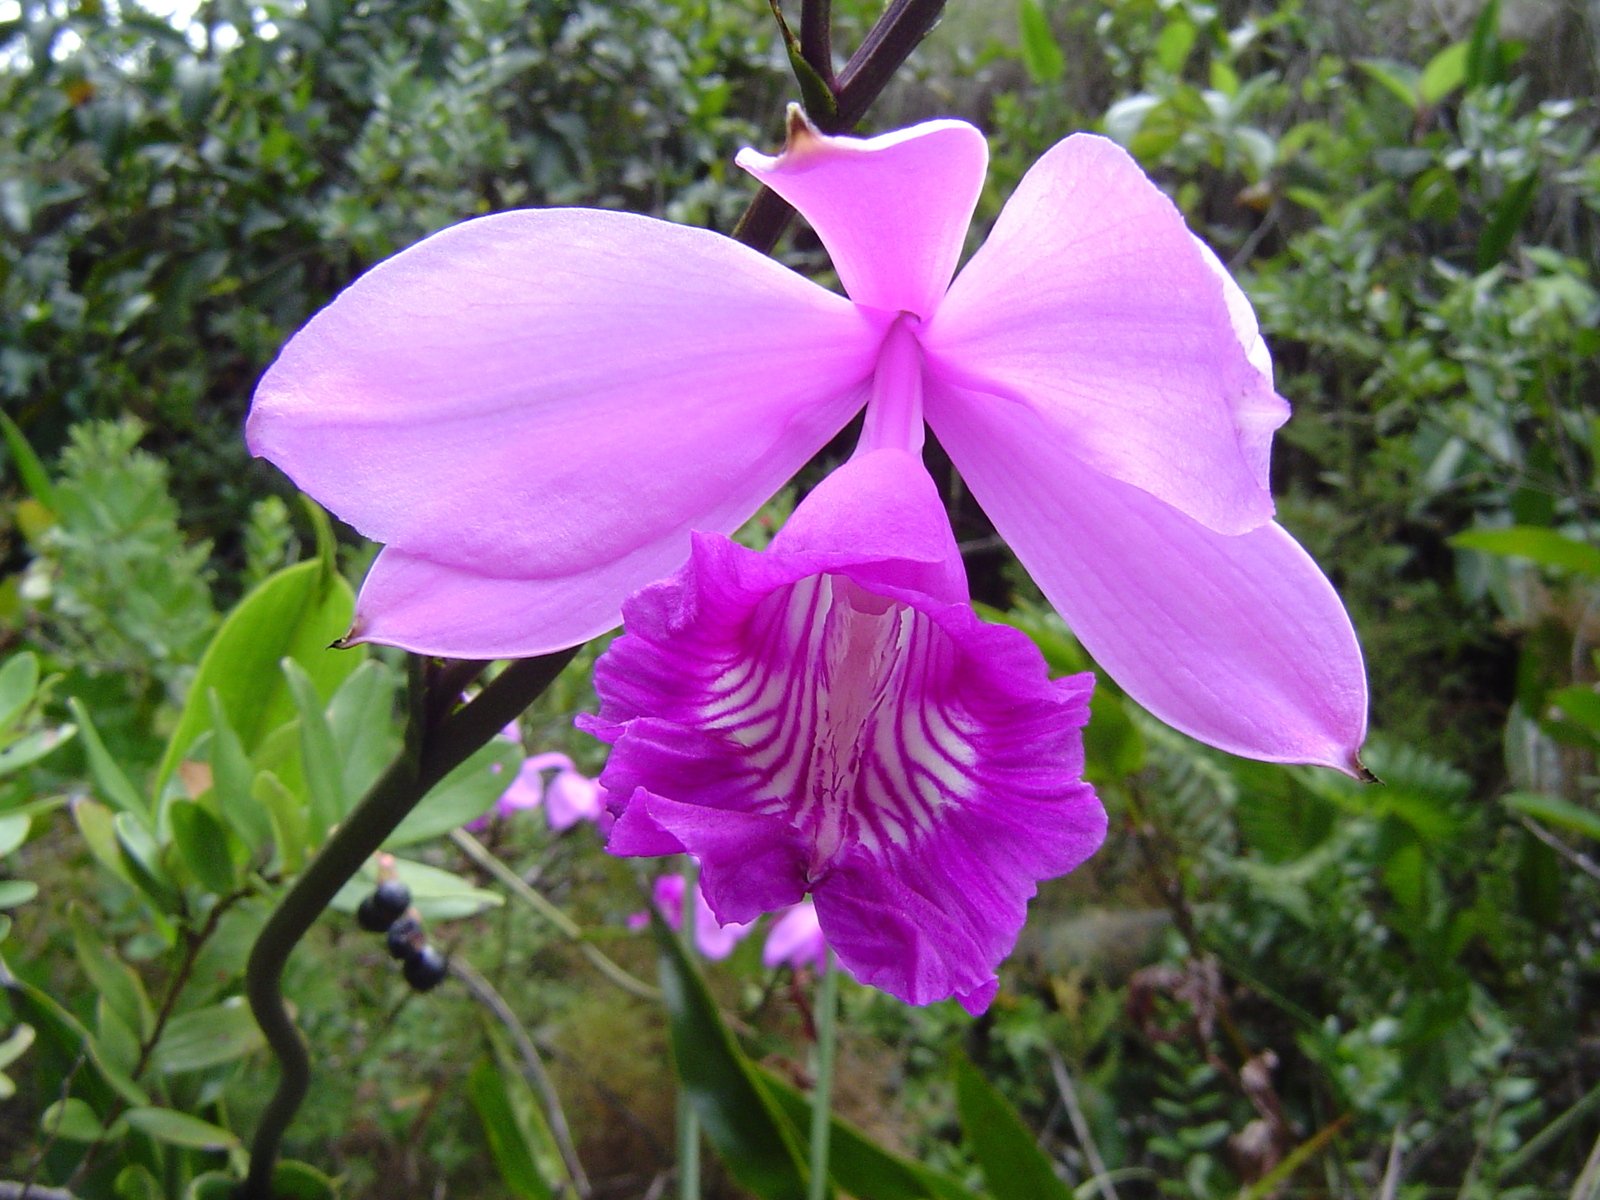 two pink orchids in their full bloom in the garden